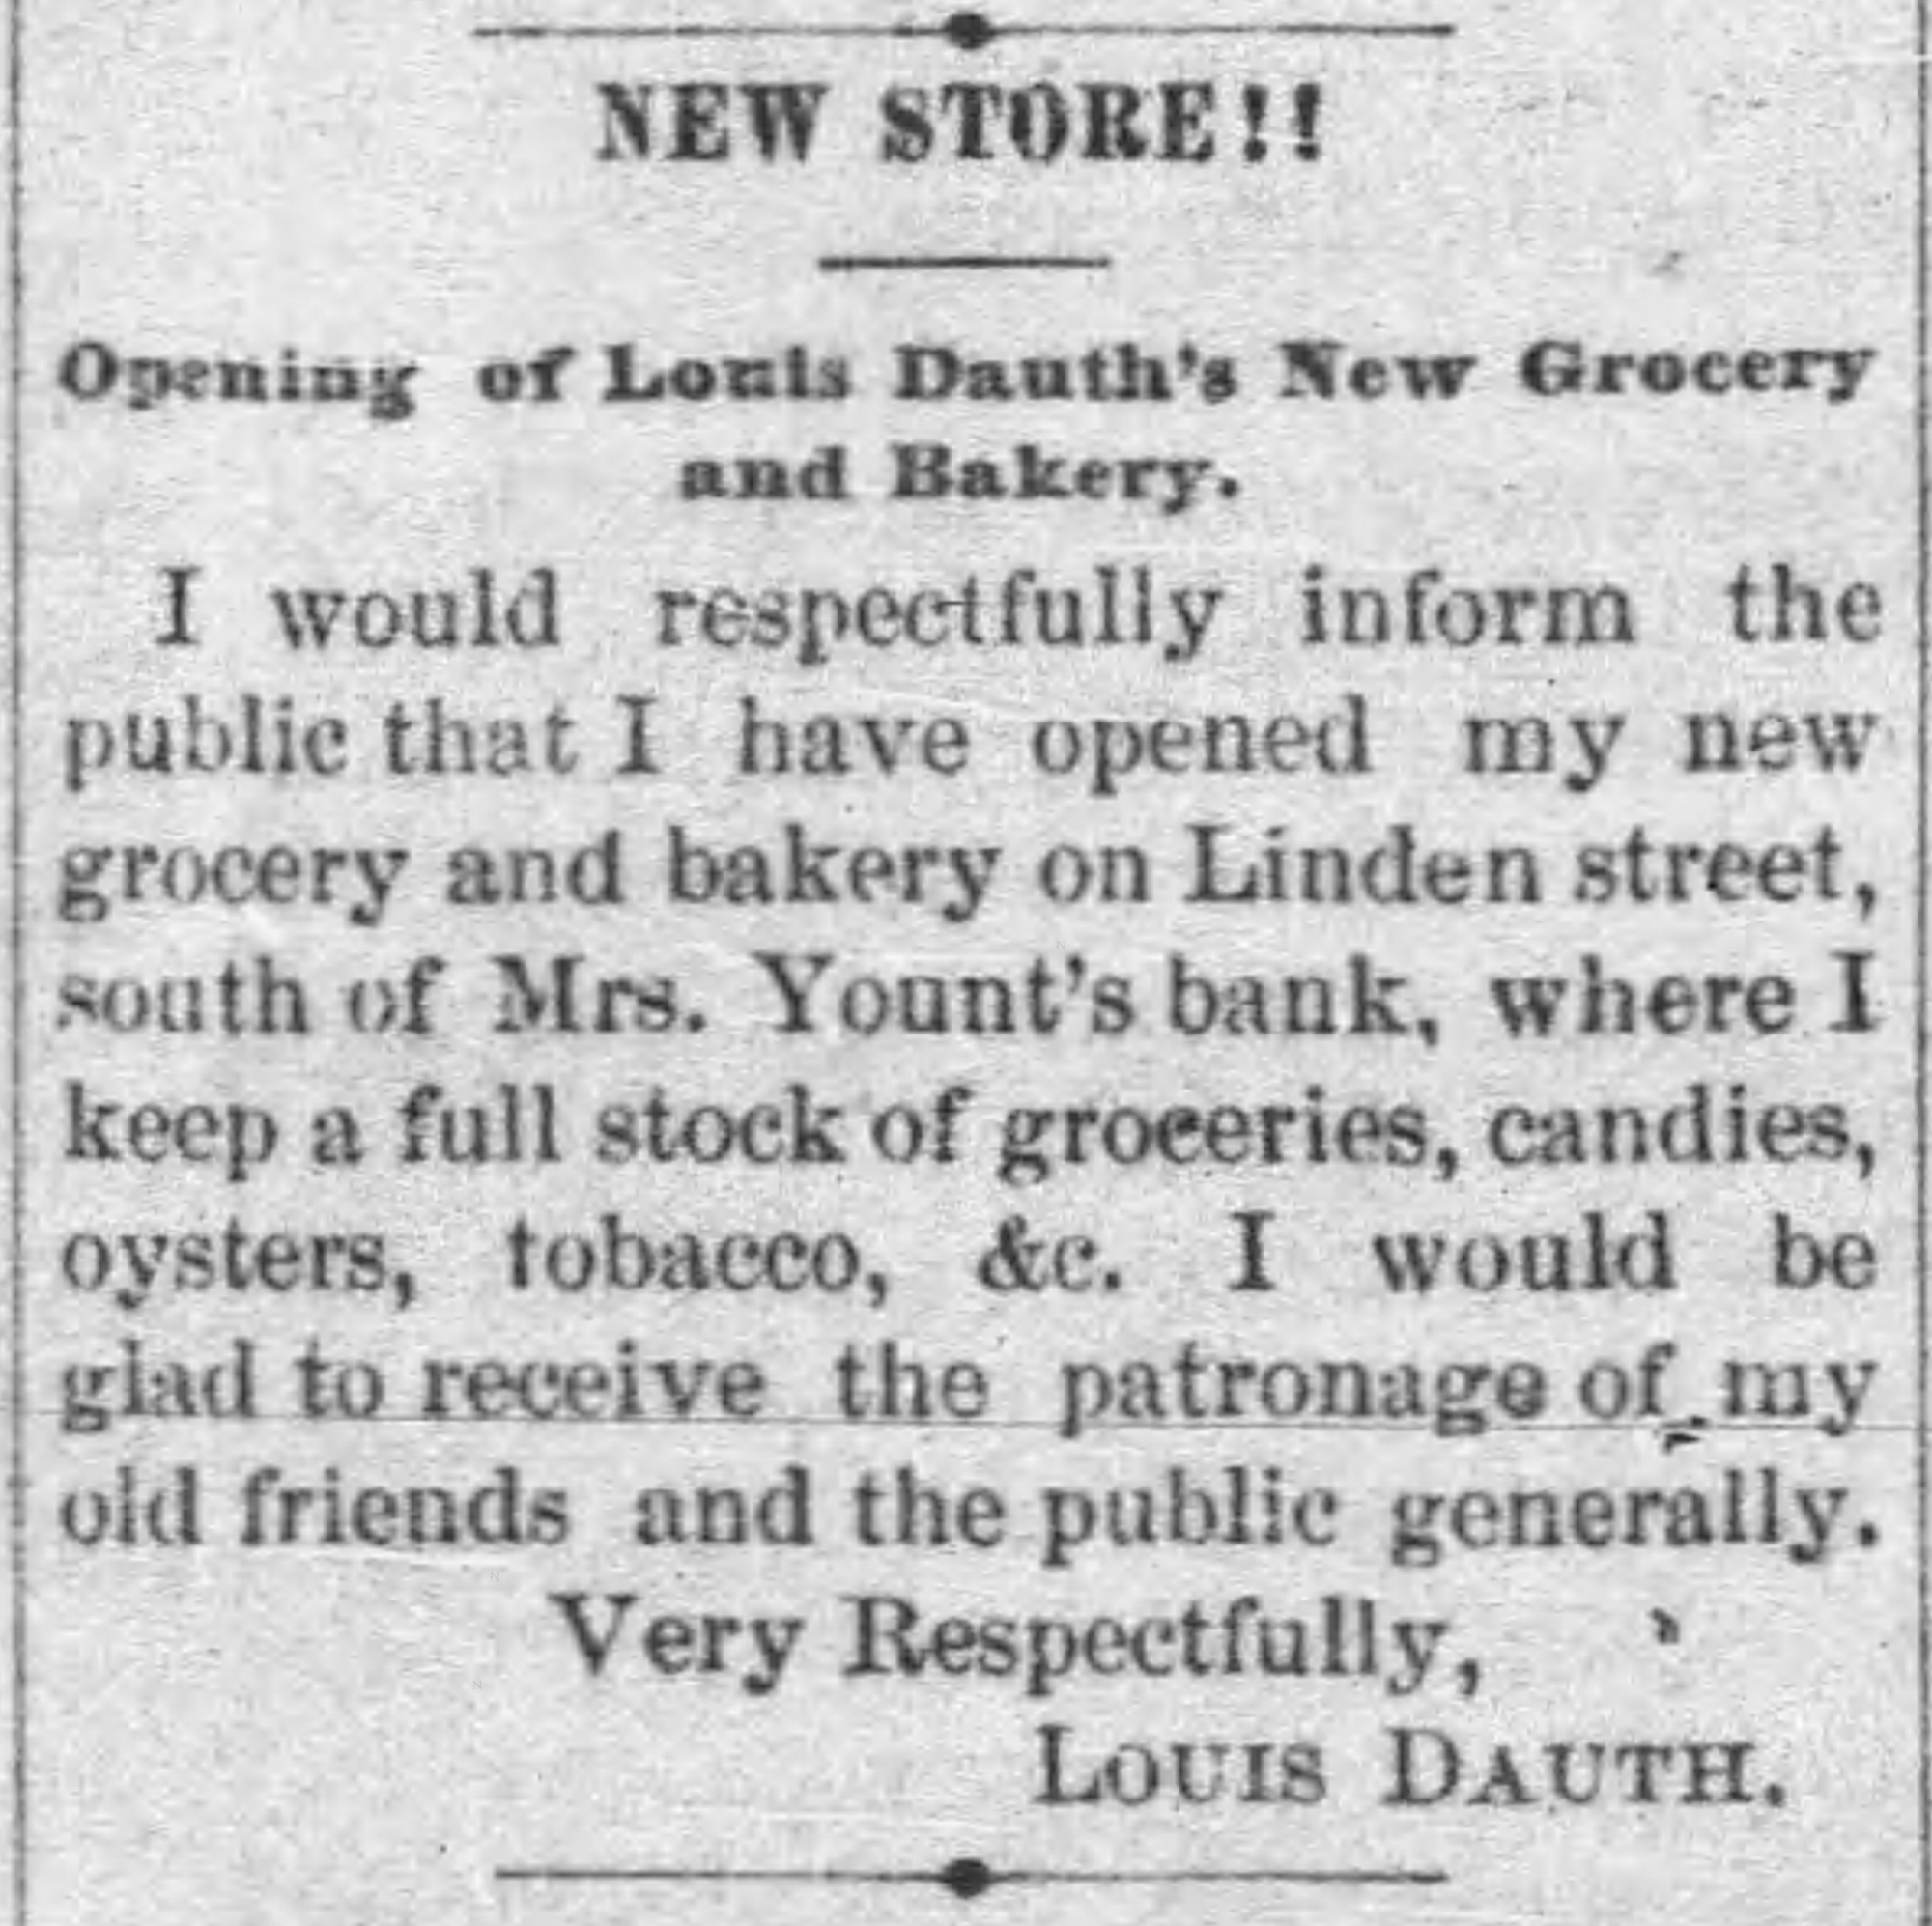 Dauth Family Archive - 1881-10-20 - Express - Louis Dauth Store Announcement